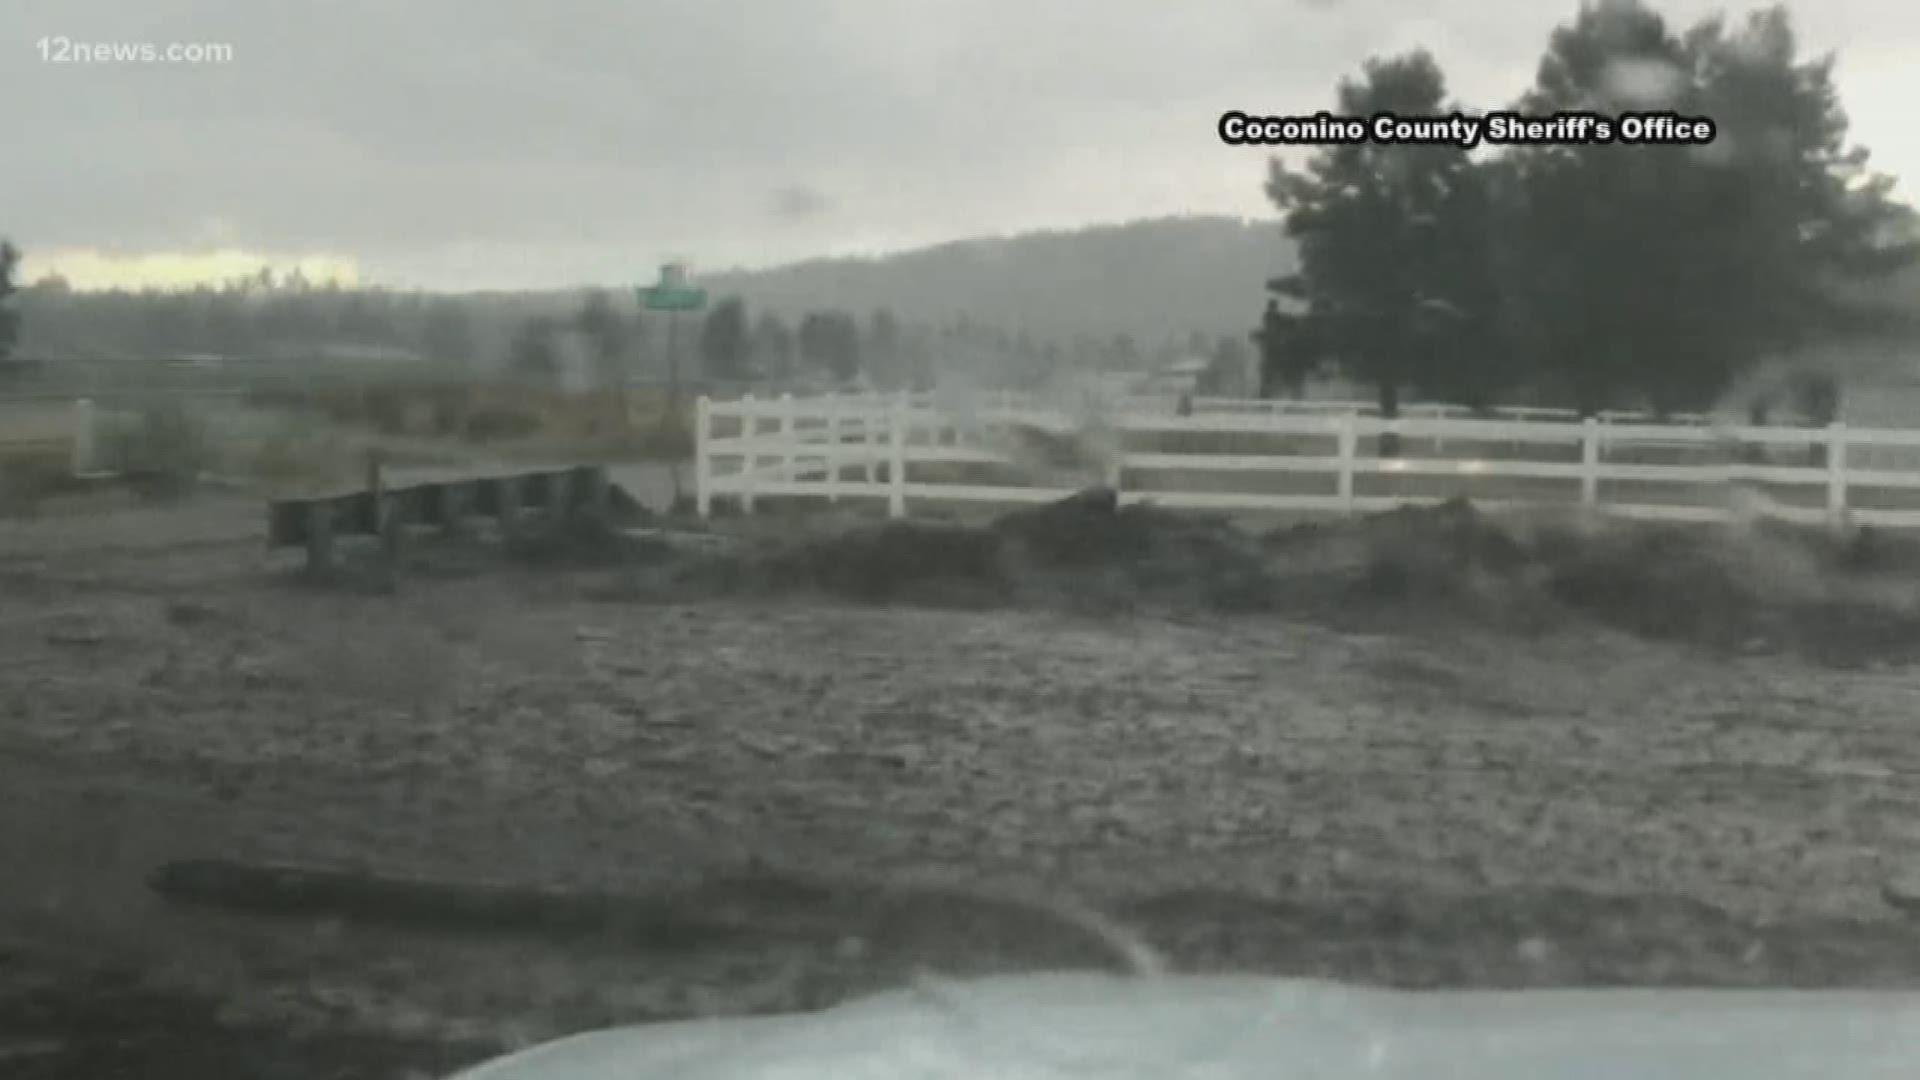 Heavy rains north of Flagstaff flooded areas along the Highway 89 corridor Wednesday afternoon.